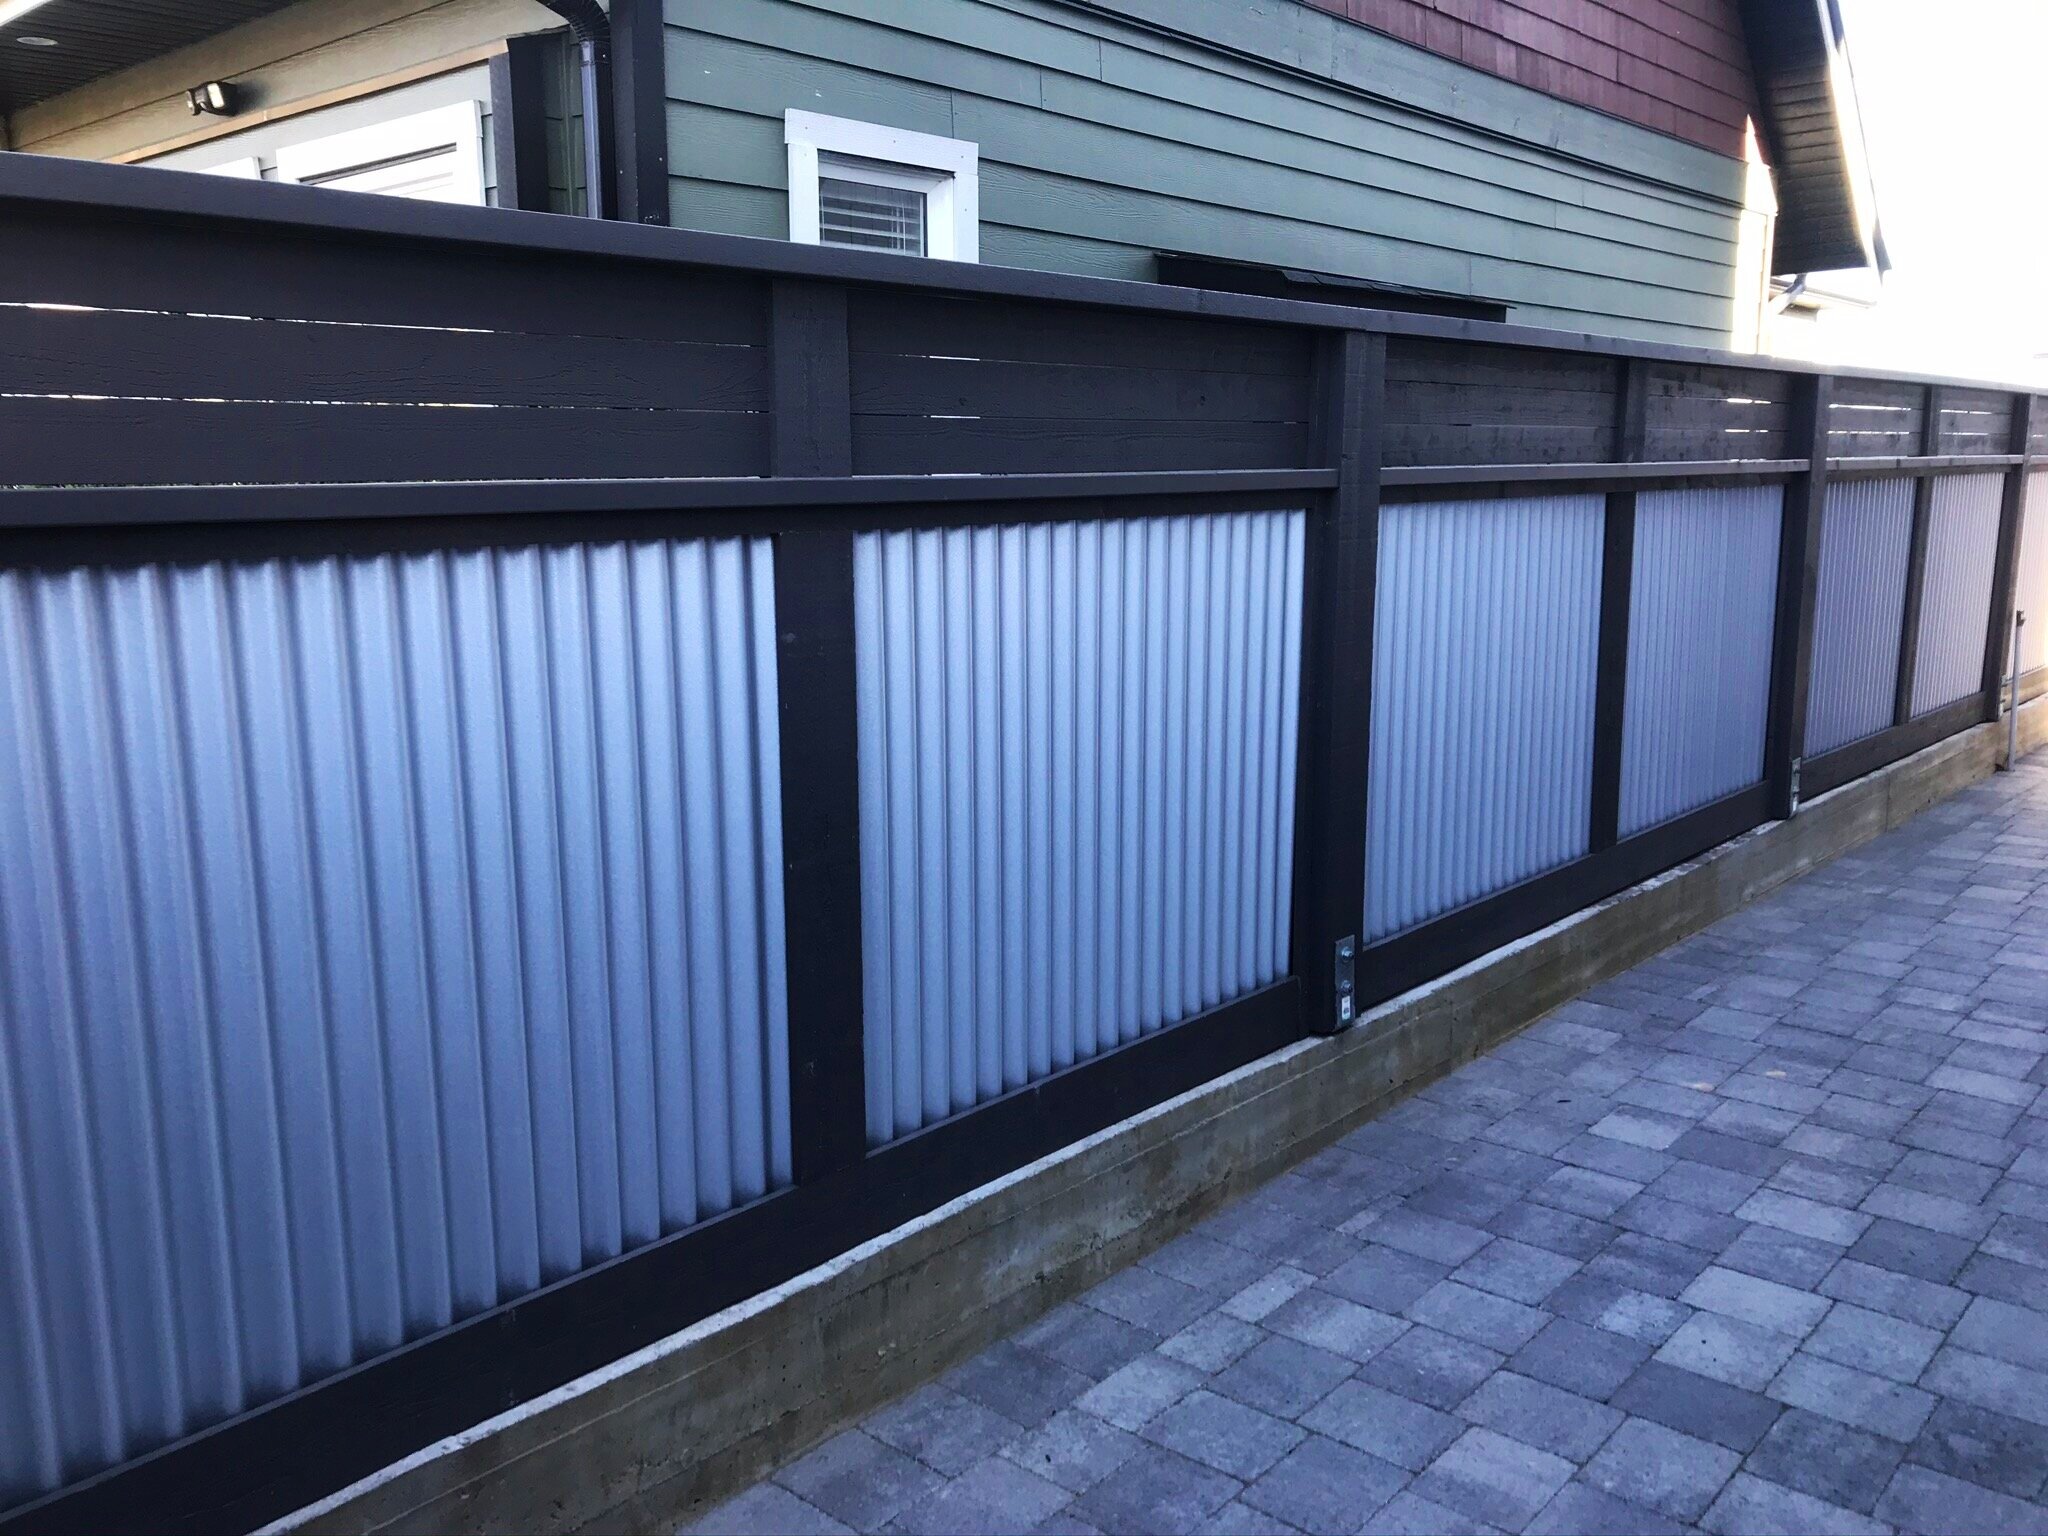 Fencing Custom Fences For Victoria Bc, Corrugated Metal Fence Panels Canada